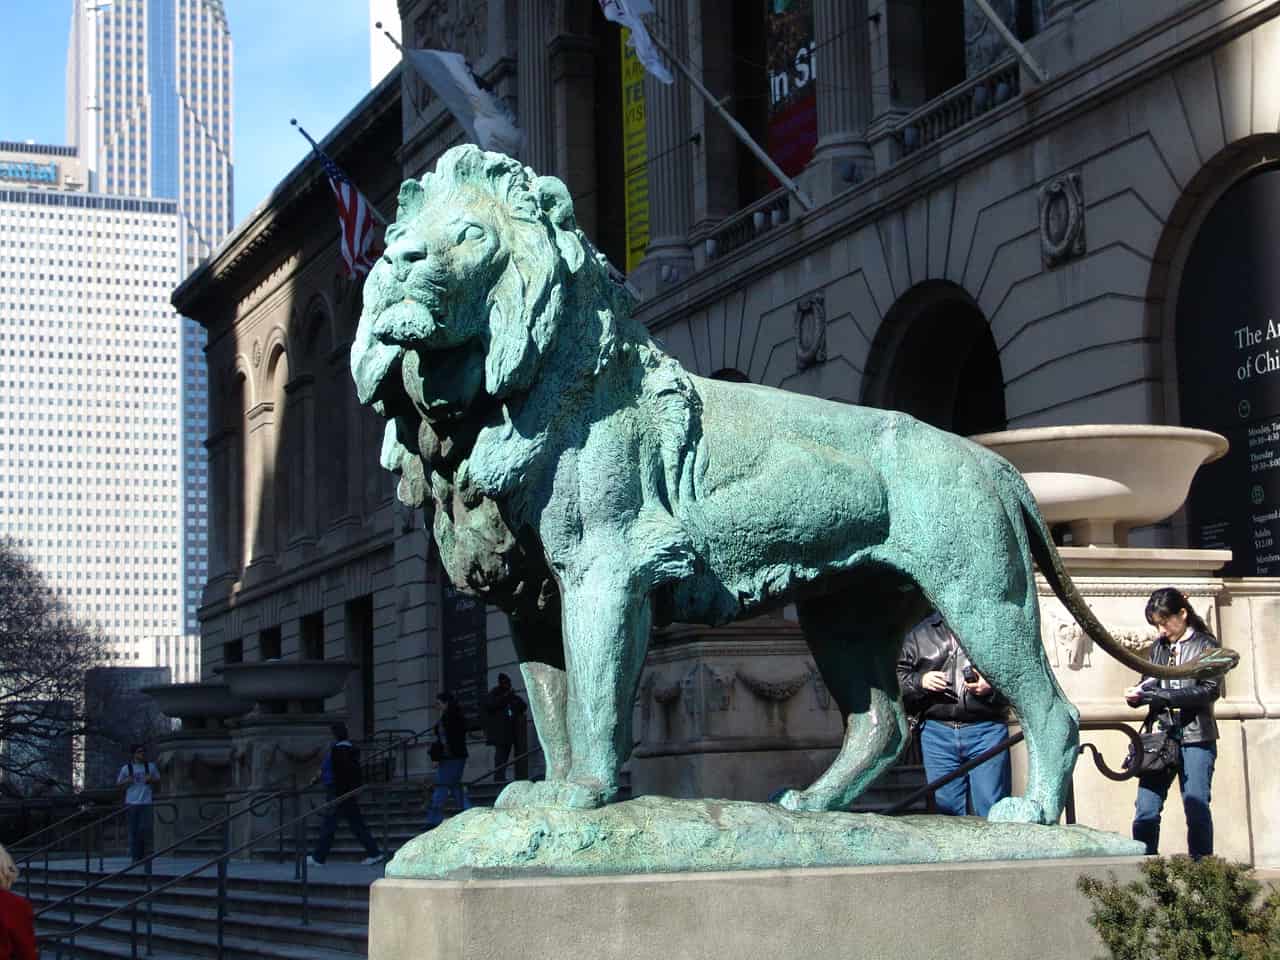 Lion at the Art Institute of Chicago